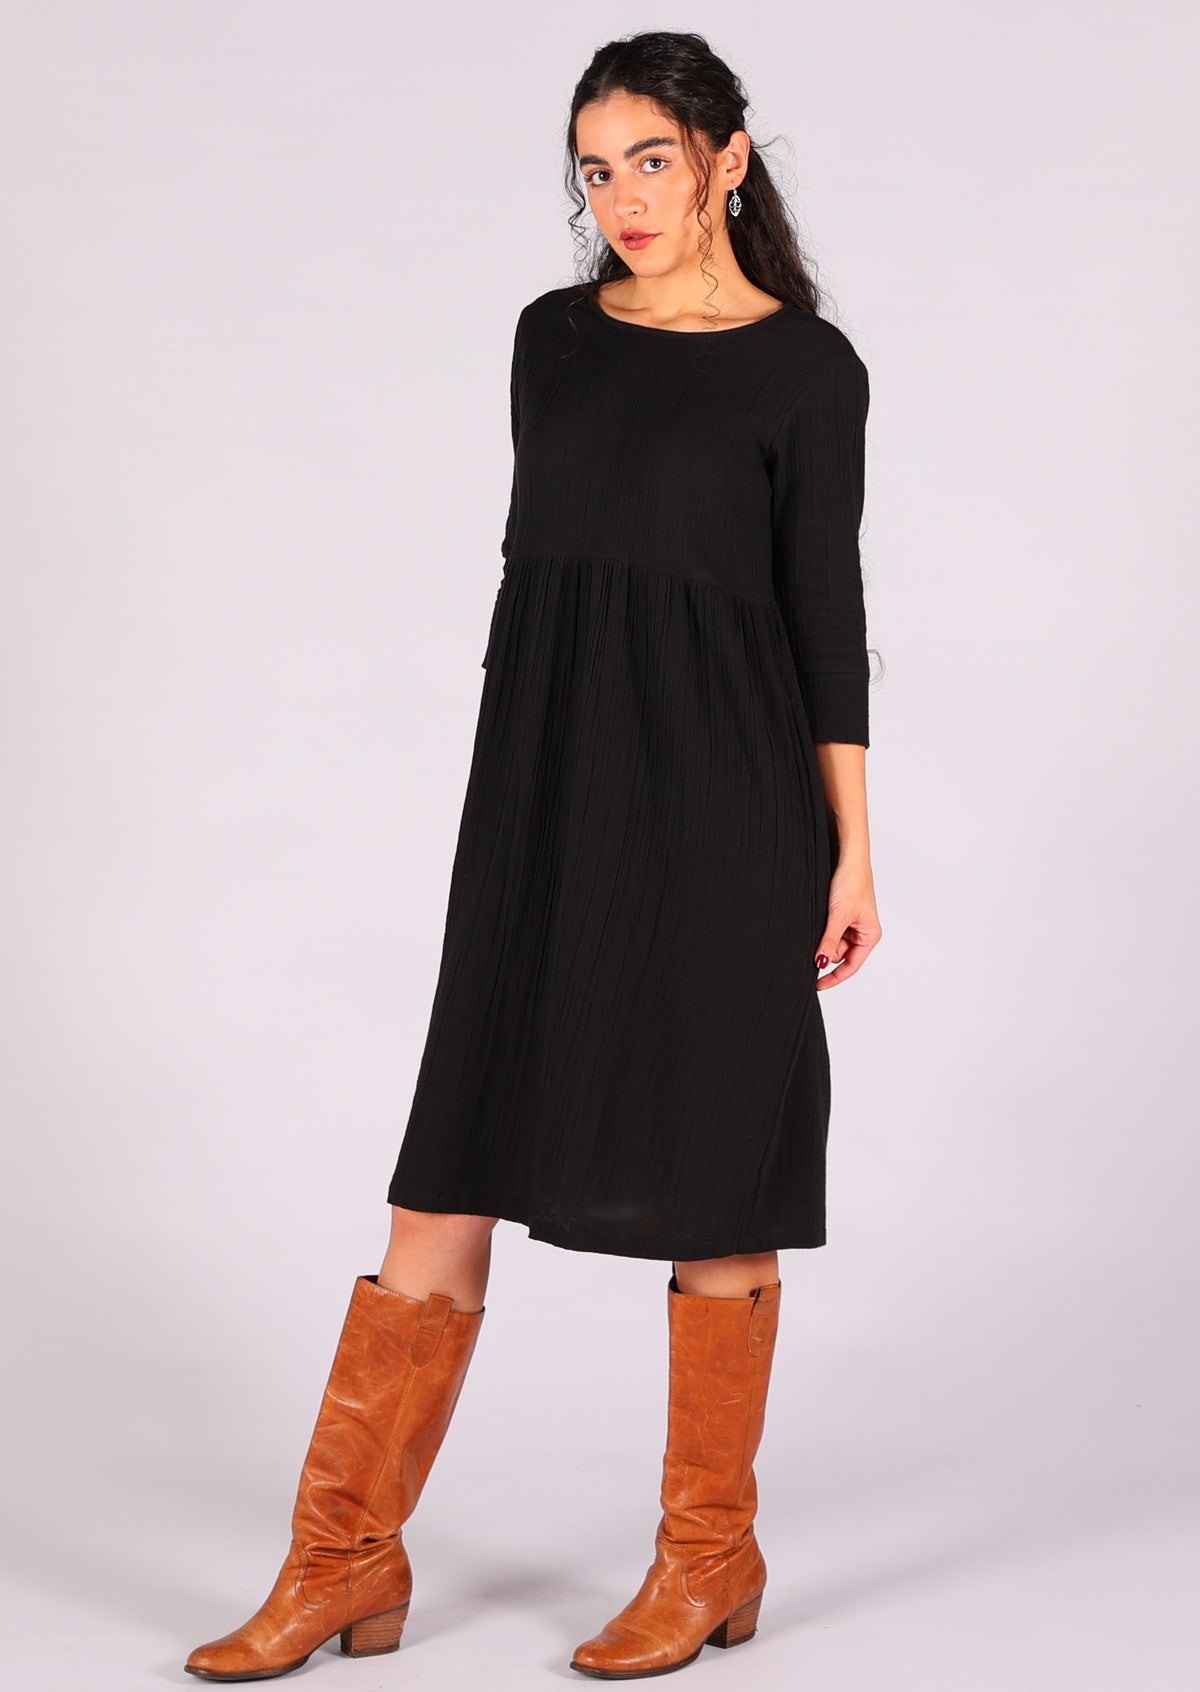 Super comfortable double cotton relaxed fit dress in black is a wardrobe essential